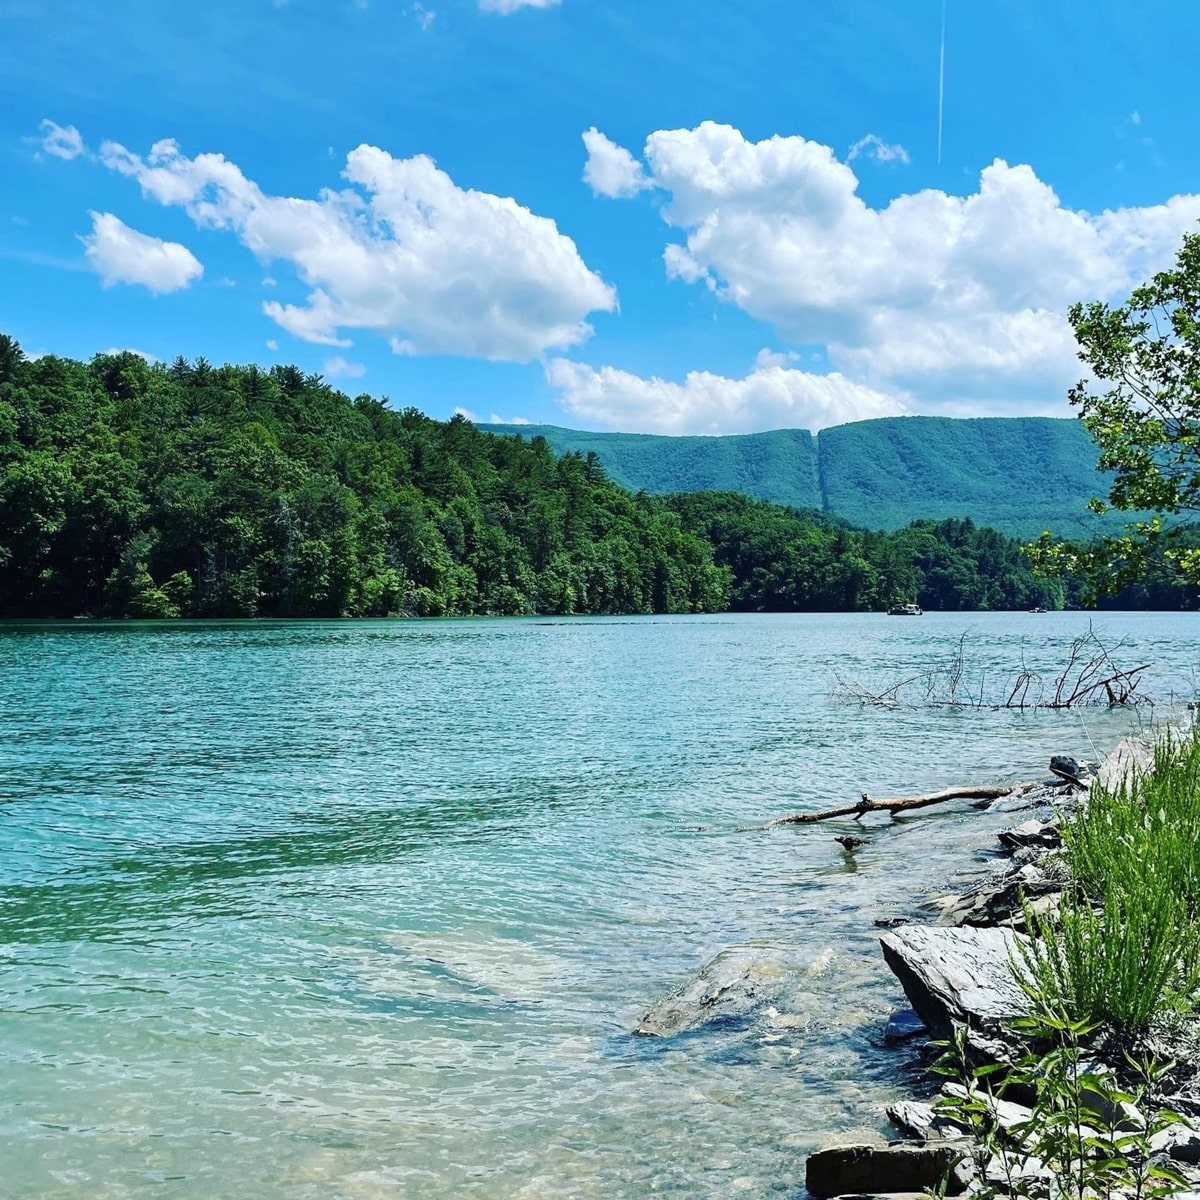 South Holston Lake with. mountain views from Spillway Trail near Bristol TN.